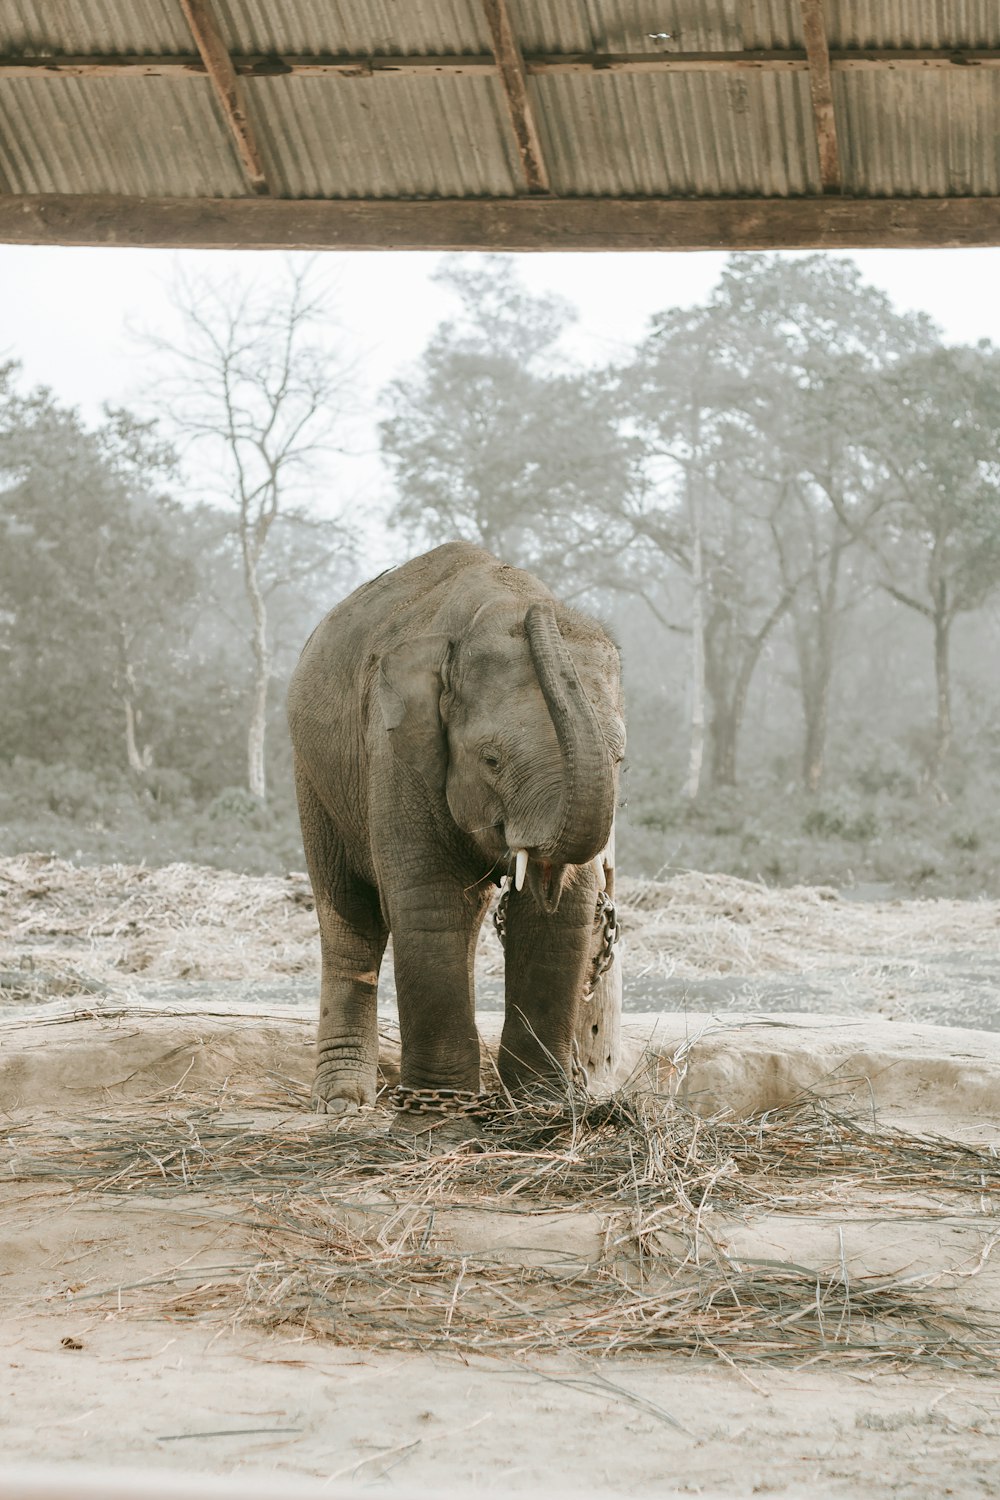 an elephant standing in the dirt under a roof